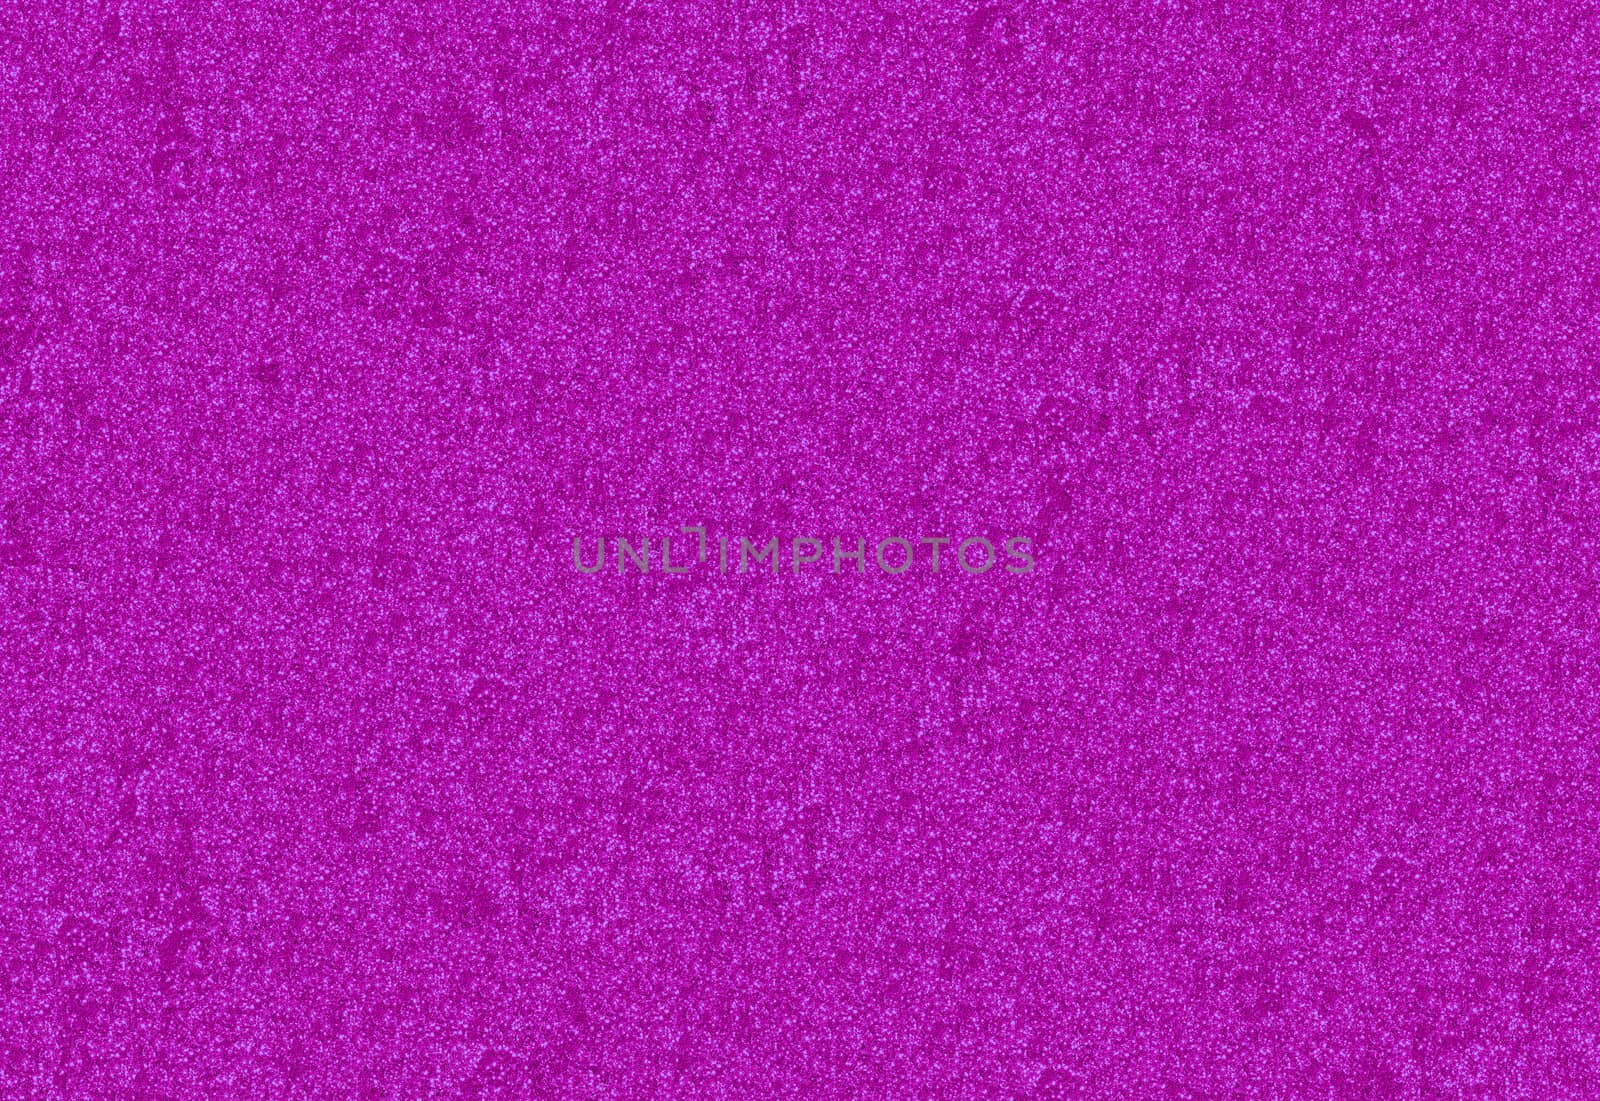 purple glitter background or wallpaper by ftlaudgirl